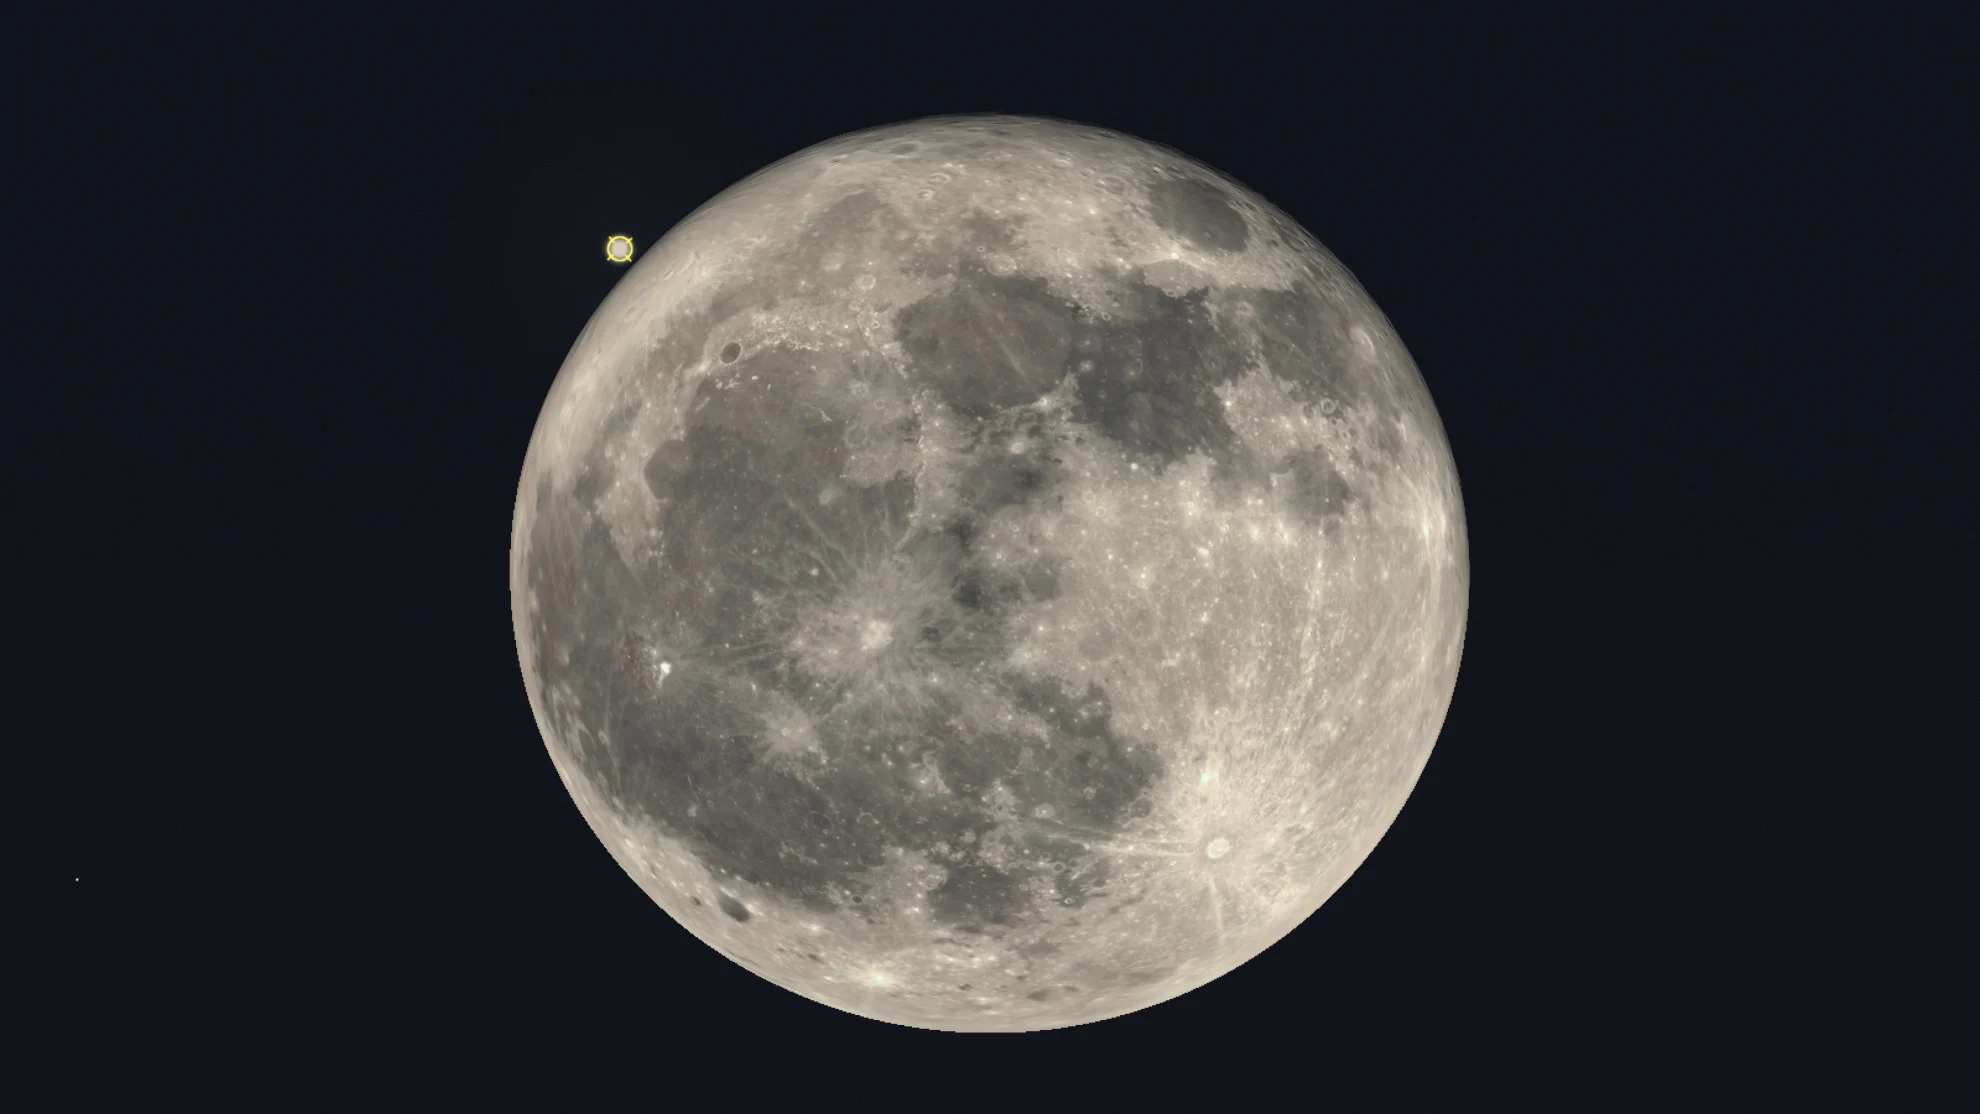 Eyes to the sky this week to see May's Full Flower Moon (plus some added bonuses). What to watch for, here